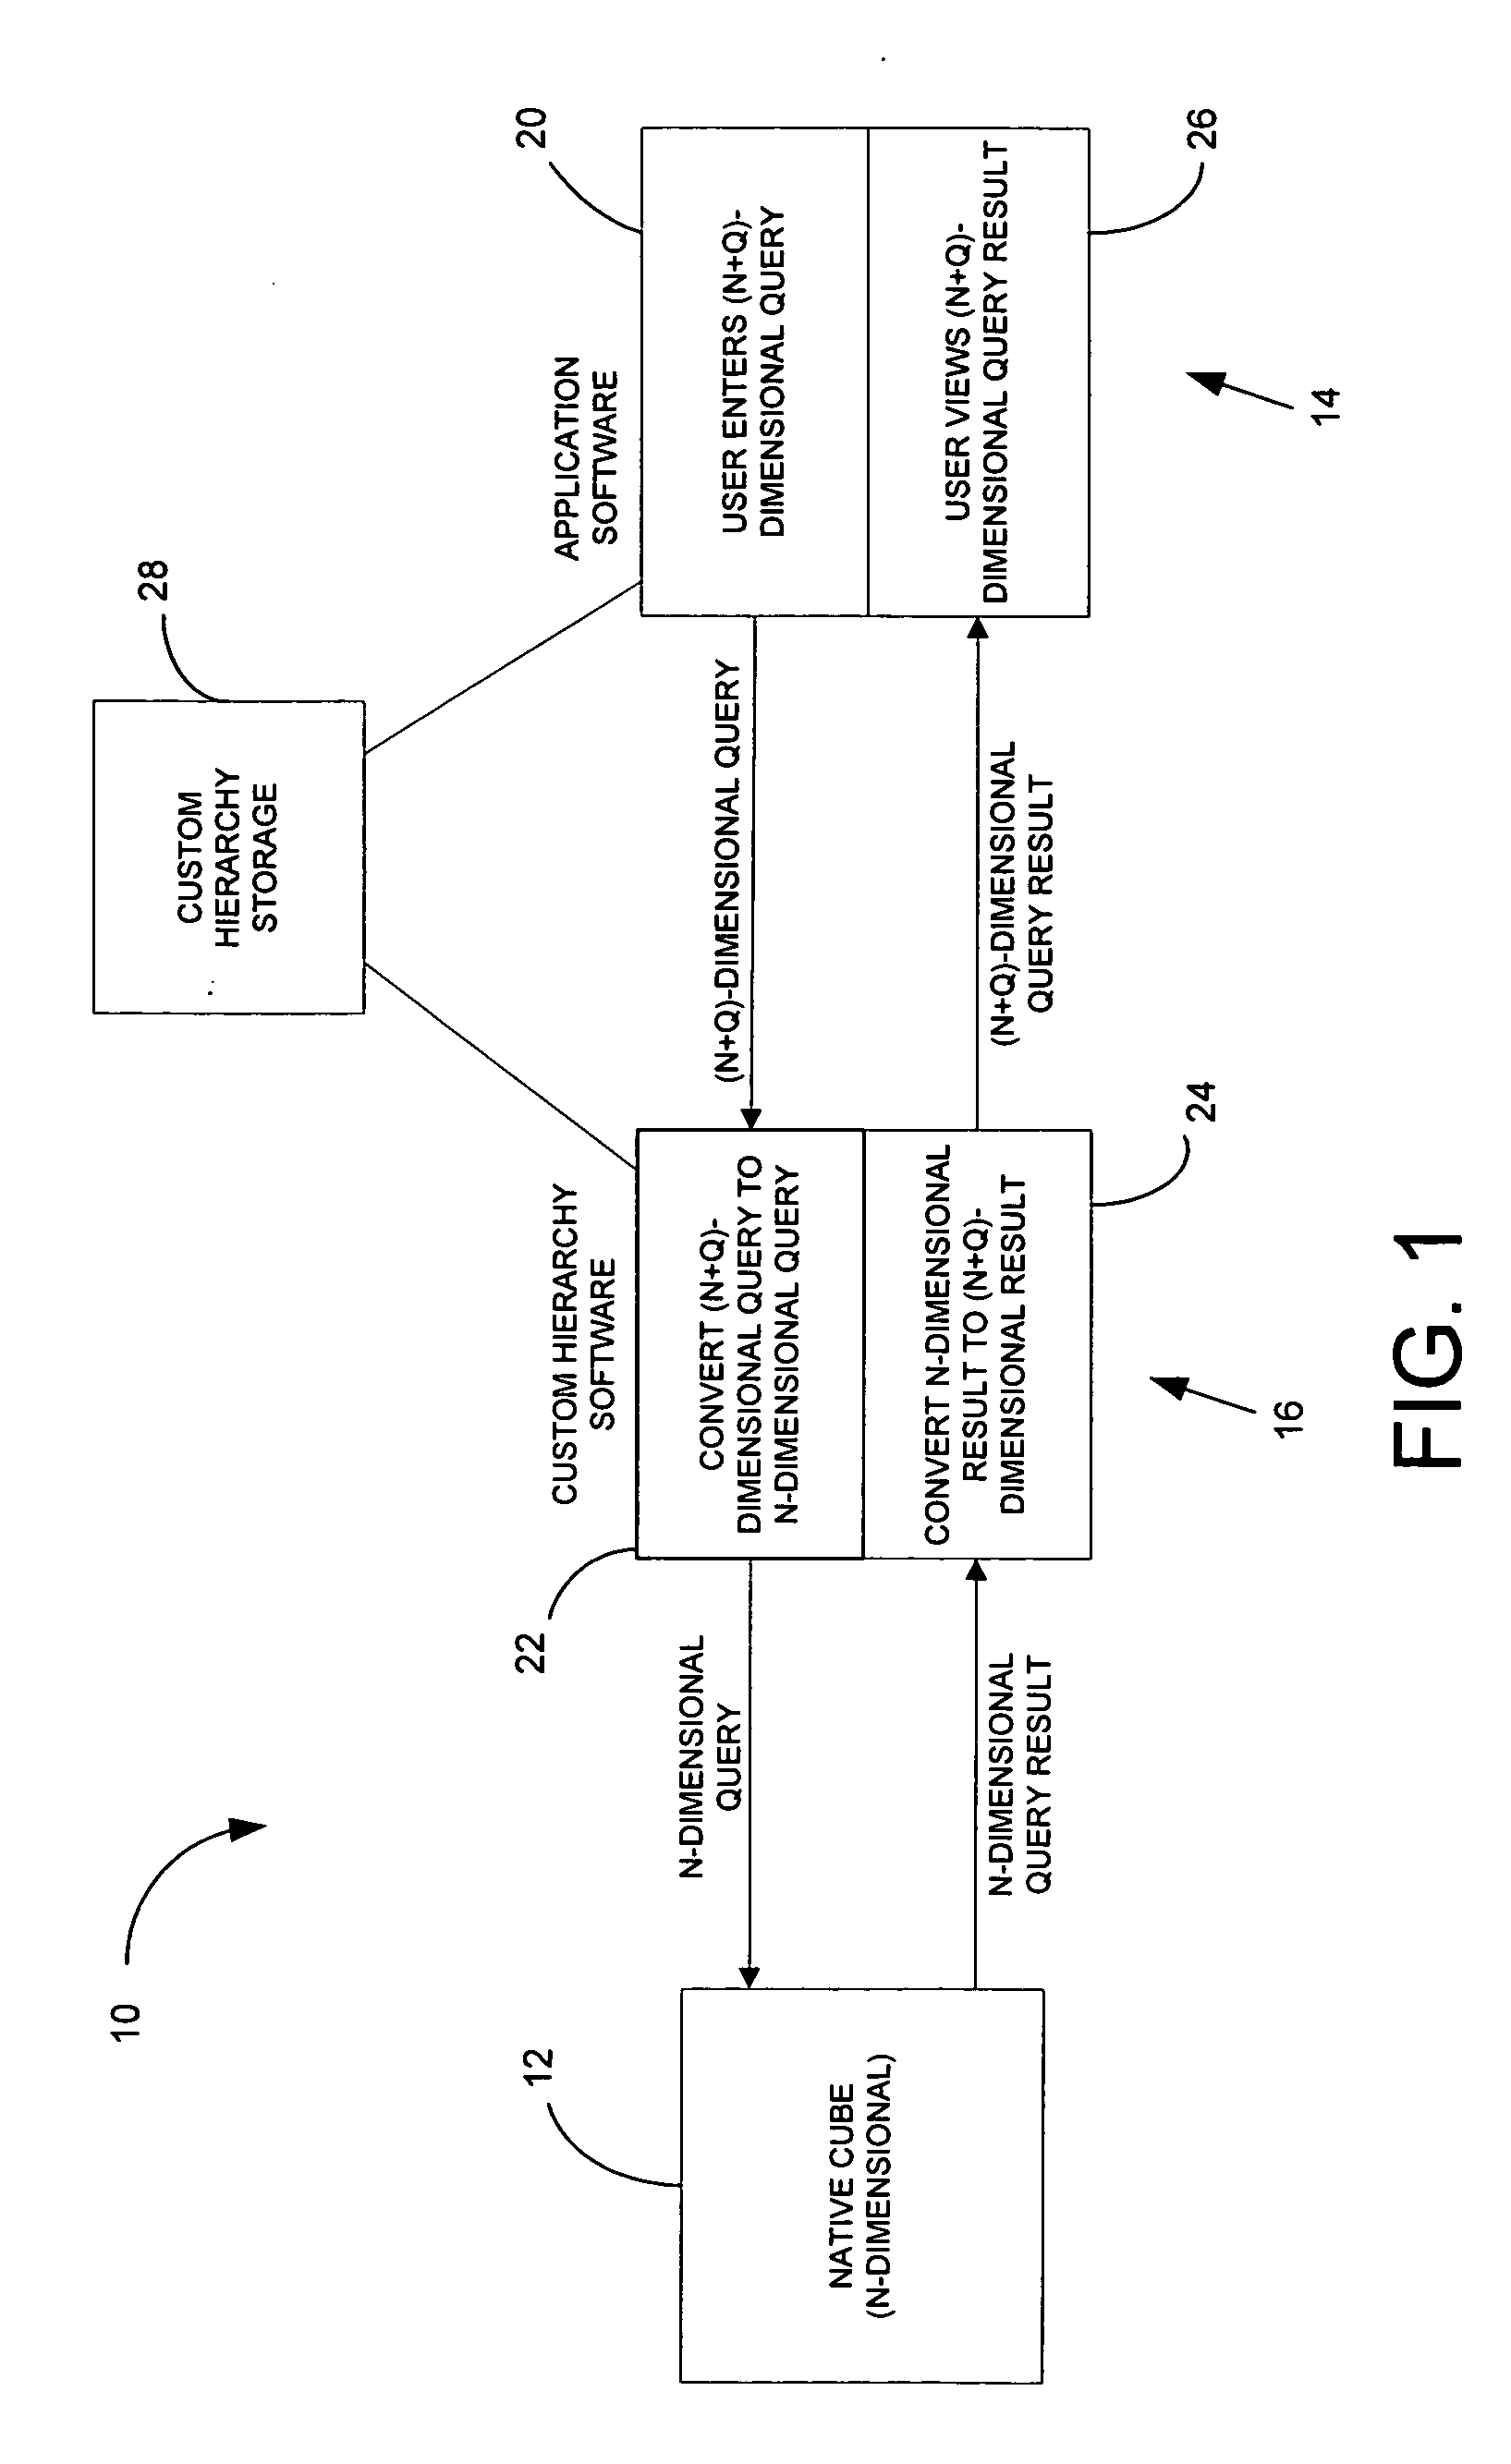 System and method for generating custom hierarchies in an analytical data structure